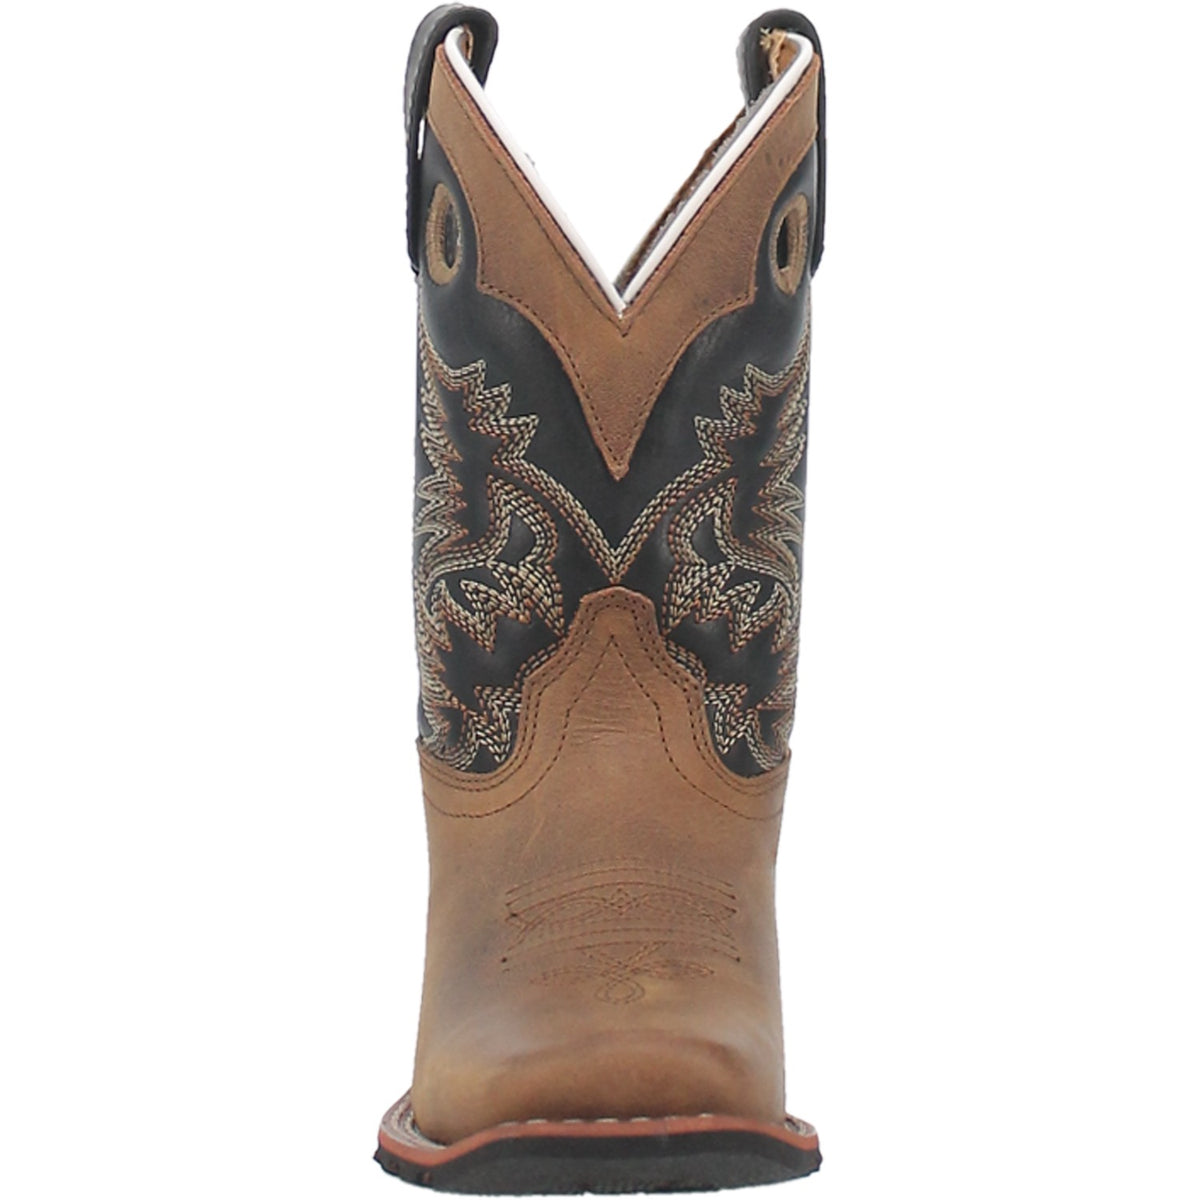 RASCAL LEATHER YOUTH BOOT Cover